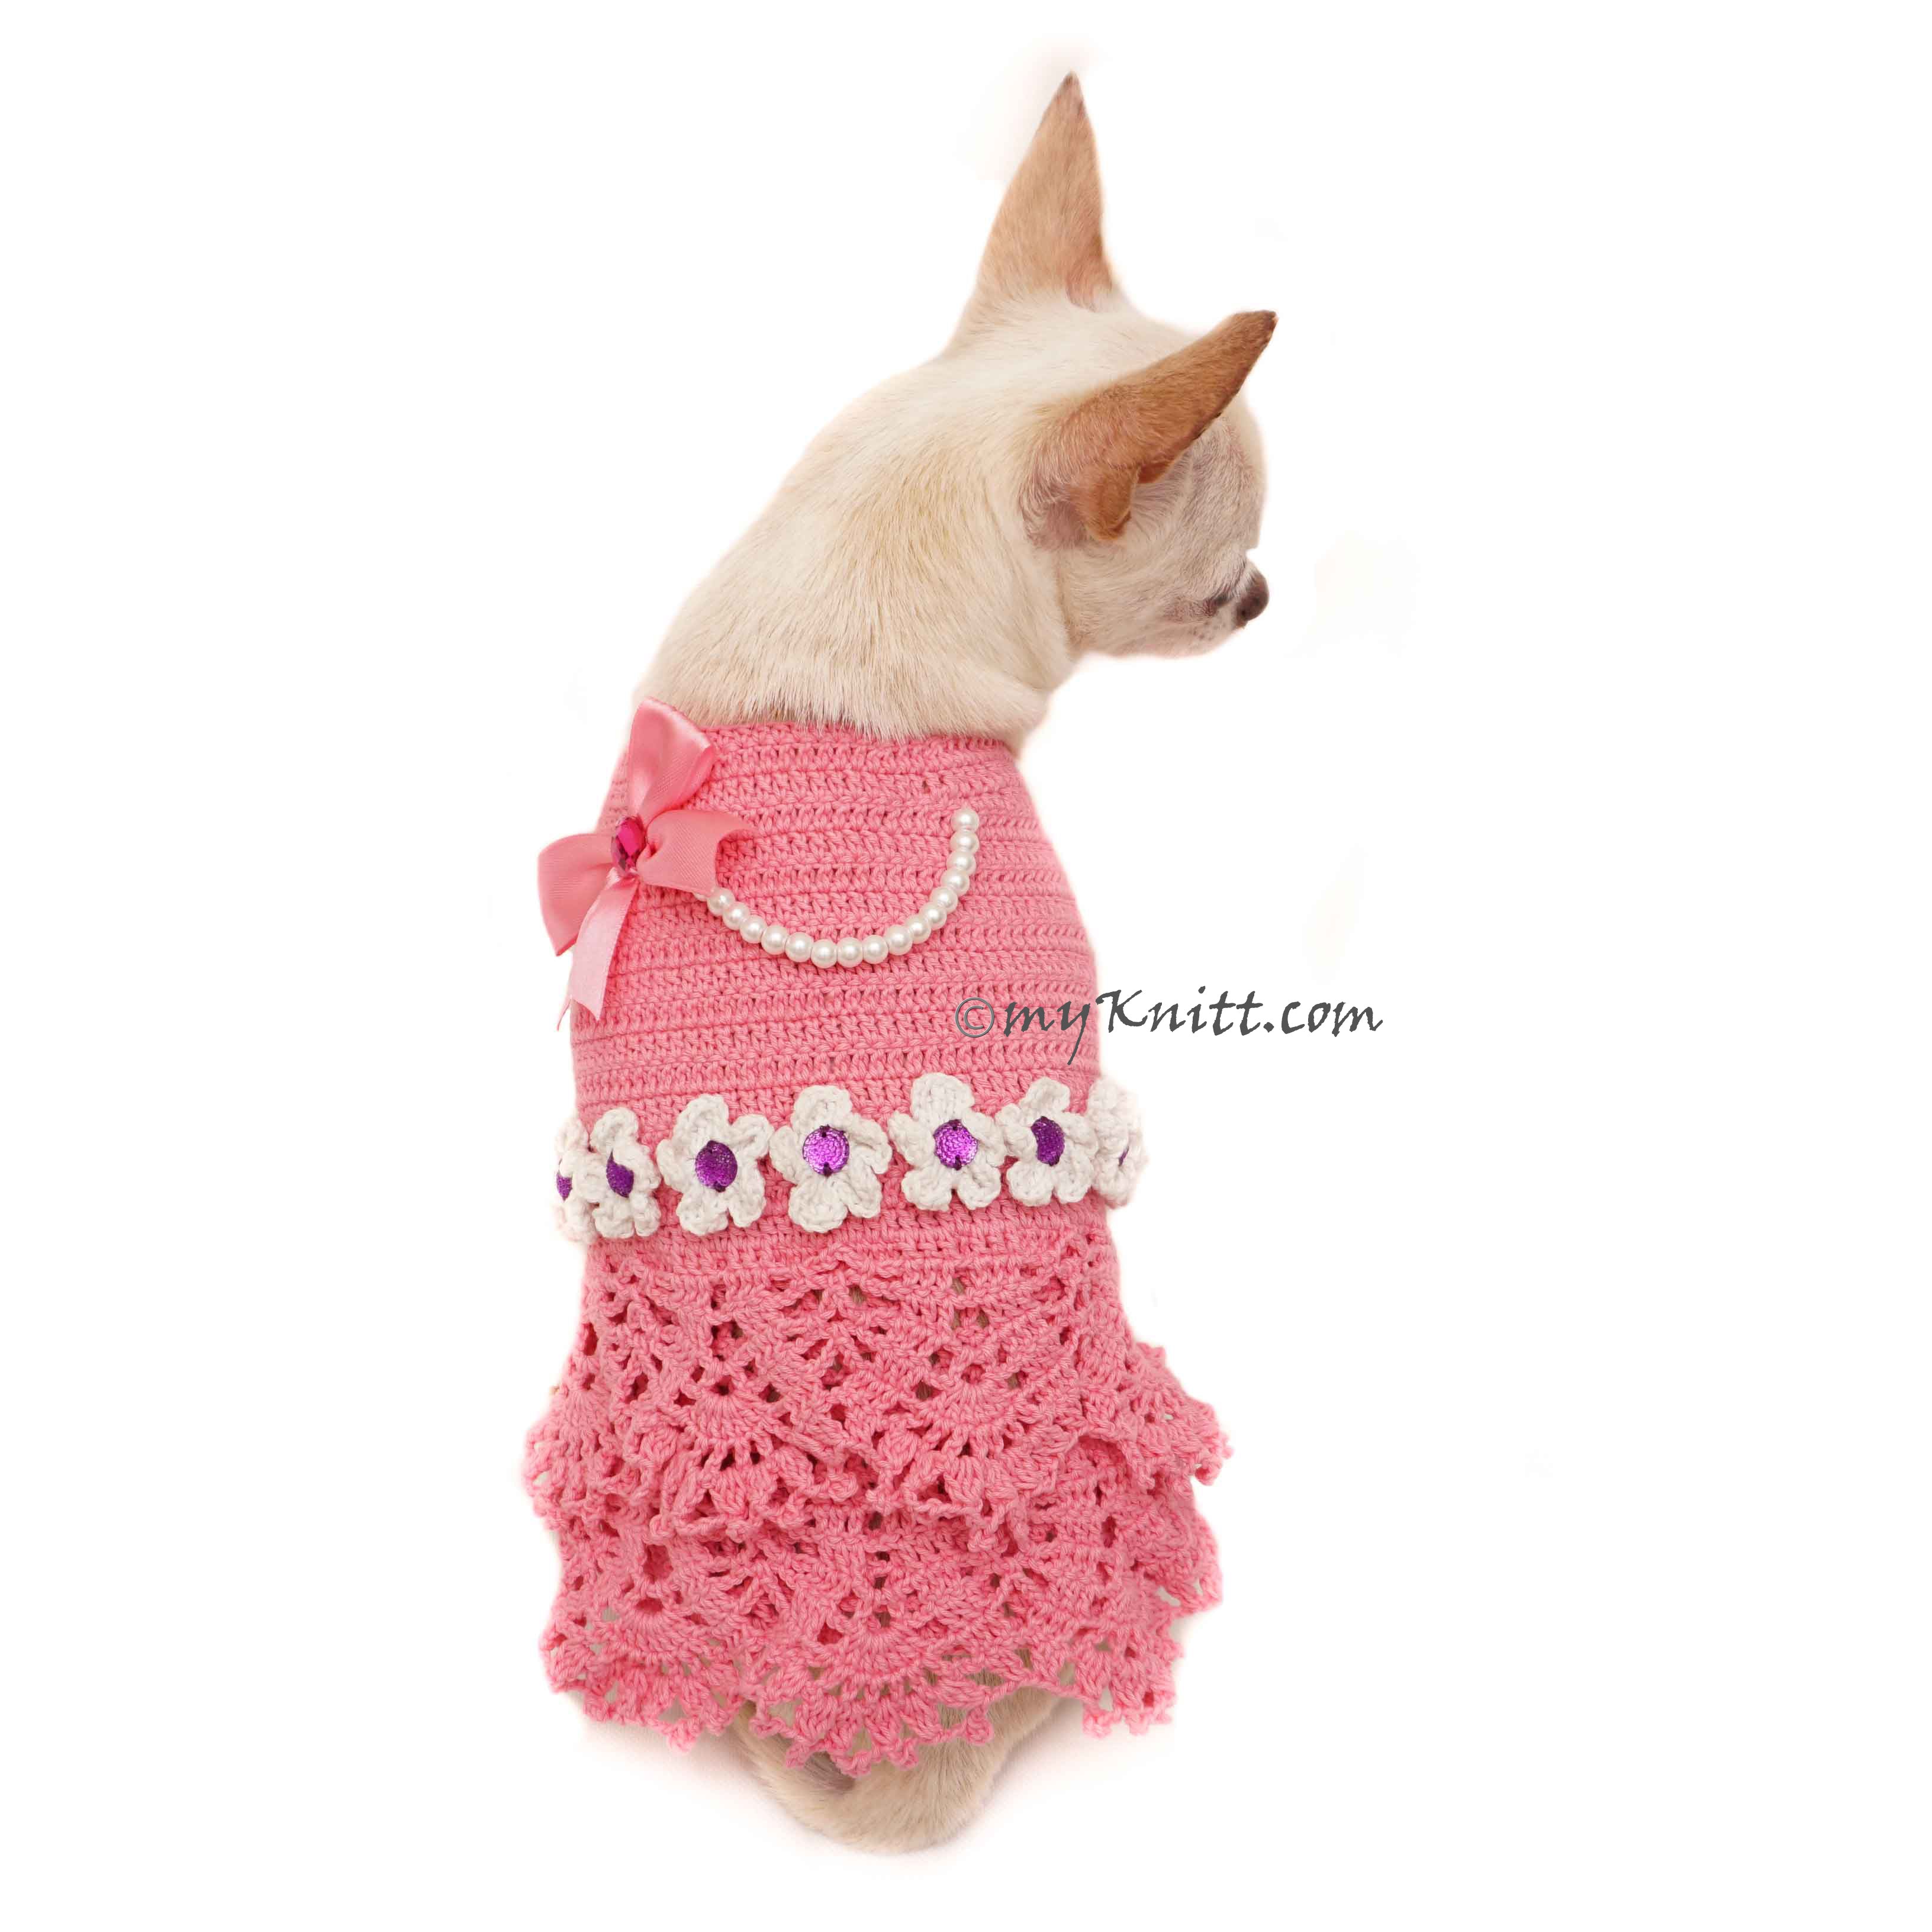 Pink Peach Dog Dress with Bow and Pearls Girly Elegant Pet Dress DF93 by Myknitt